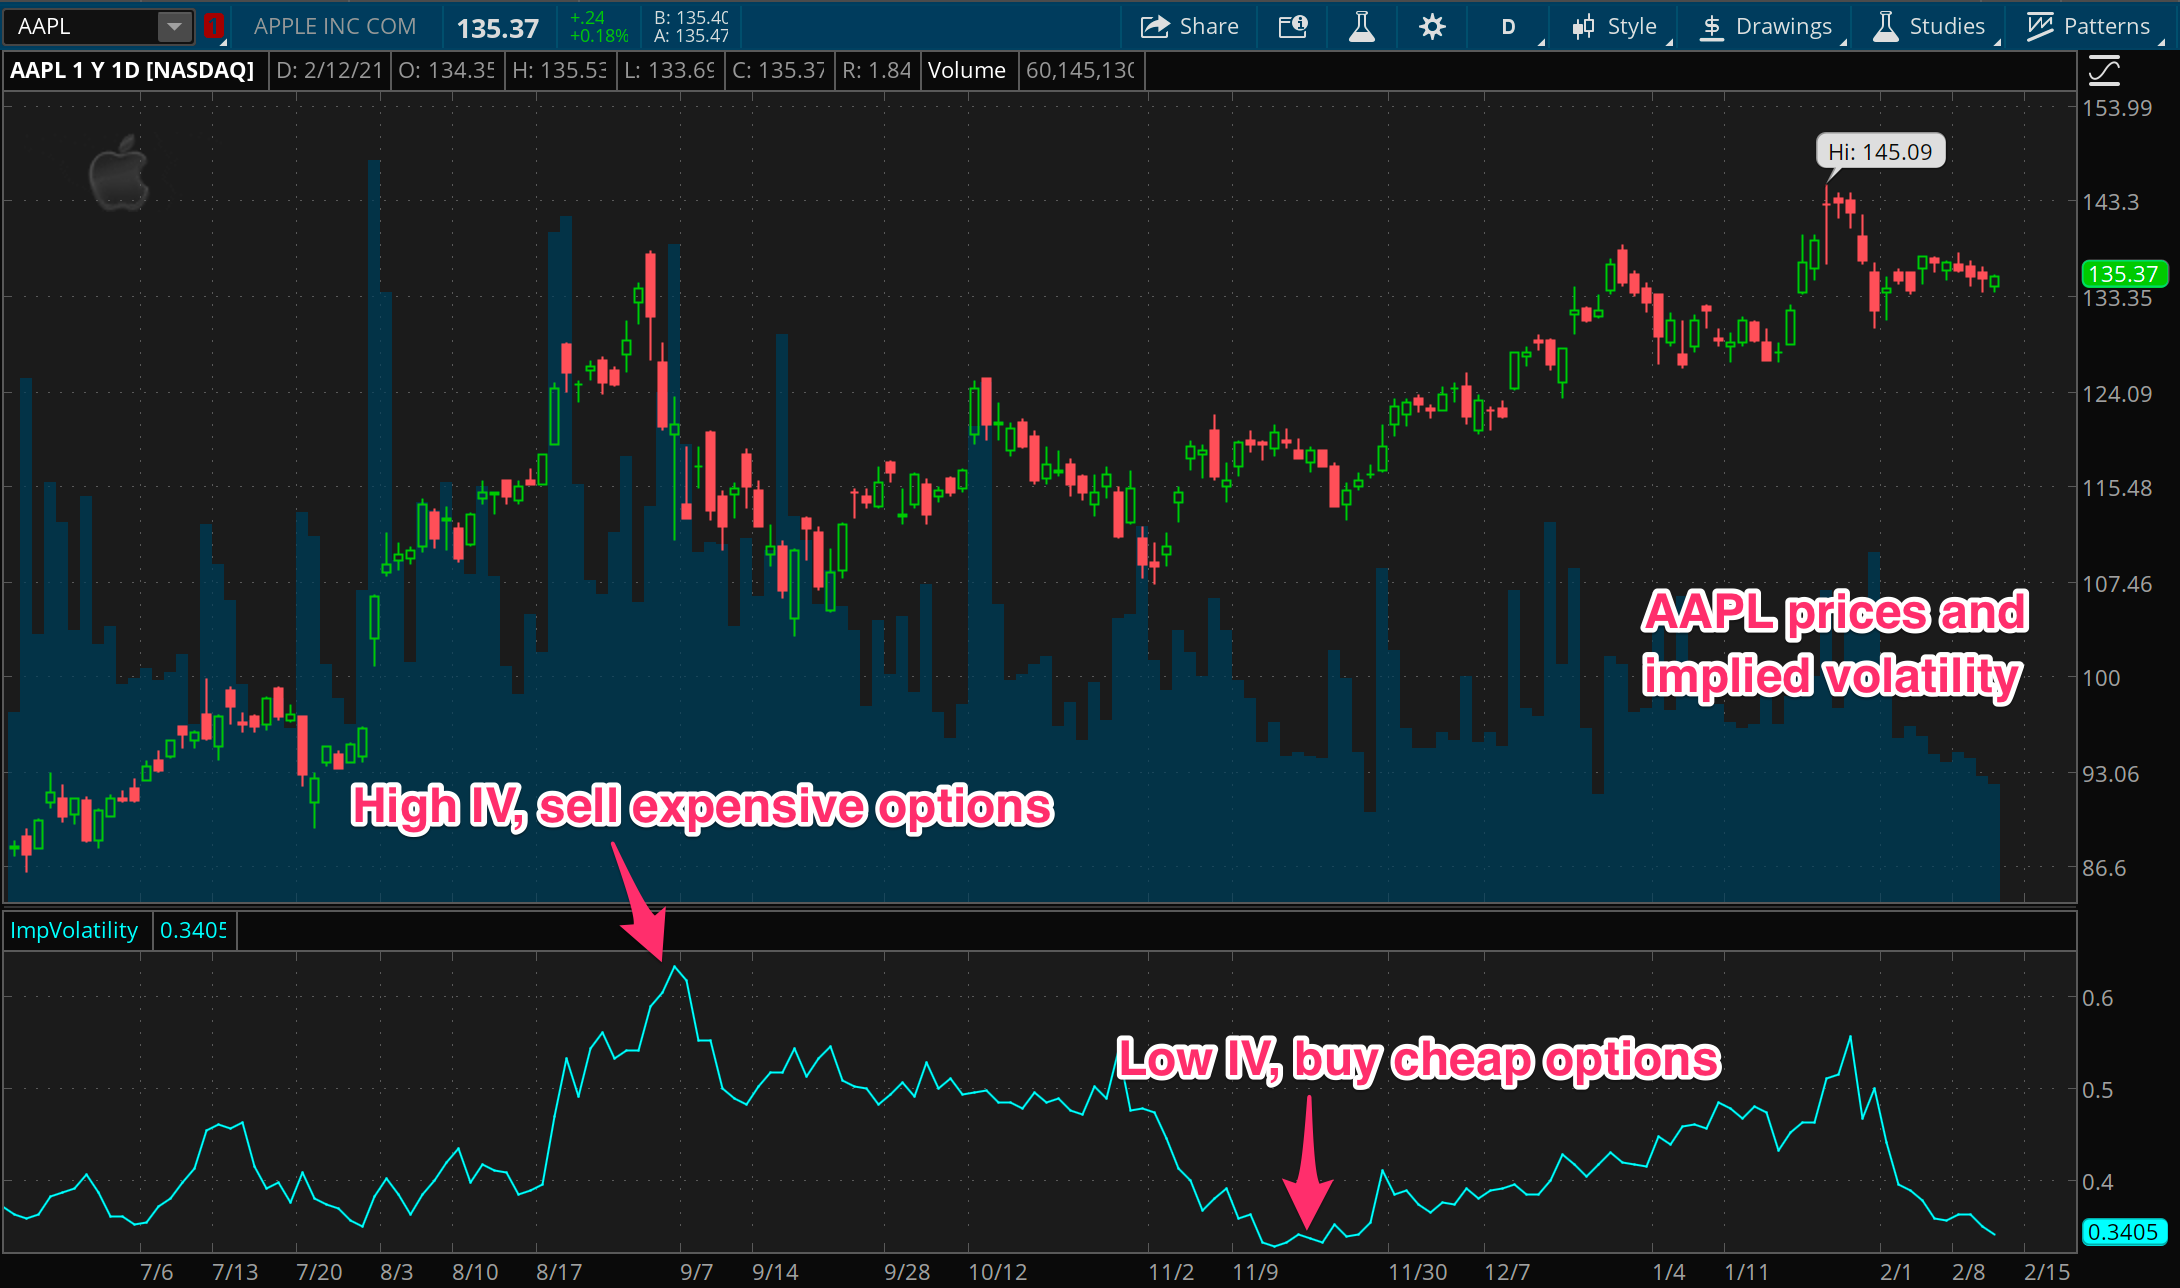 AAPL with implied volatility